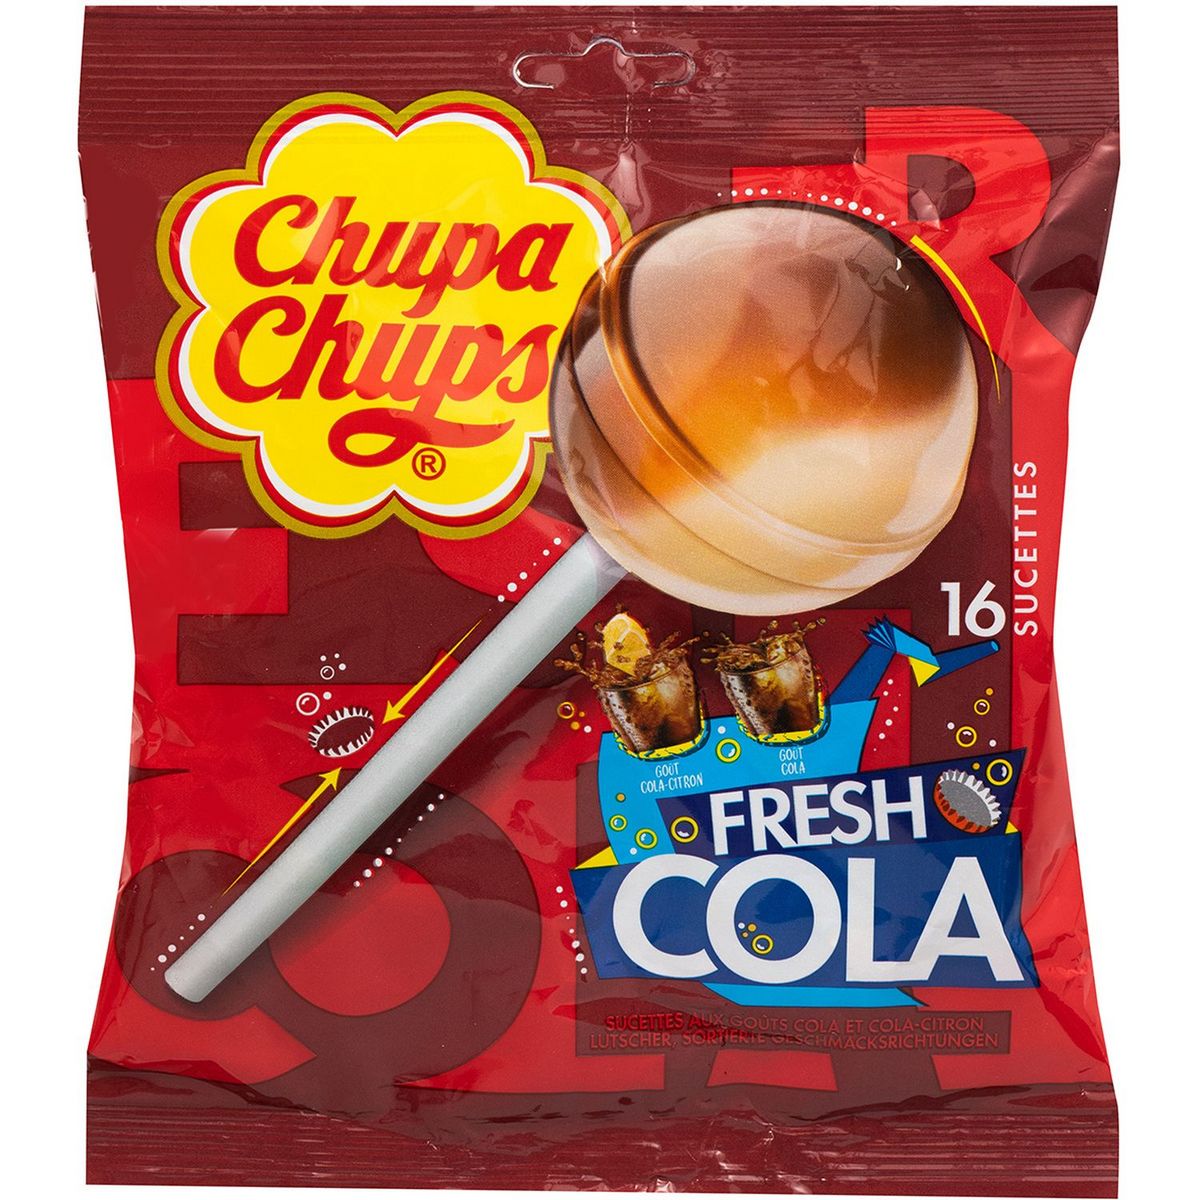 Lollipops Candy Chupa Chups Fresh Cola Buy Online My French Grocery